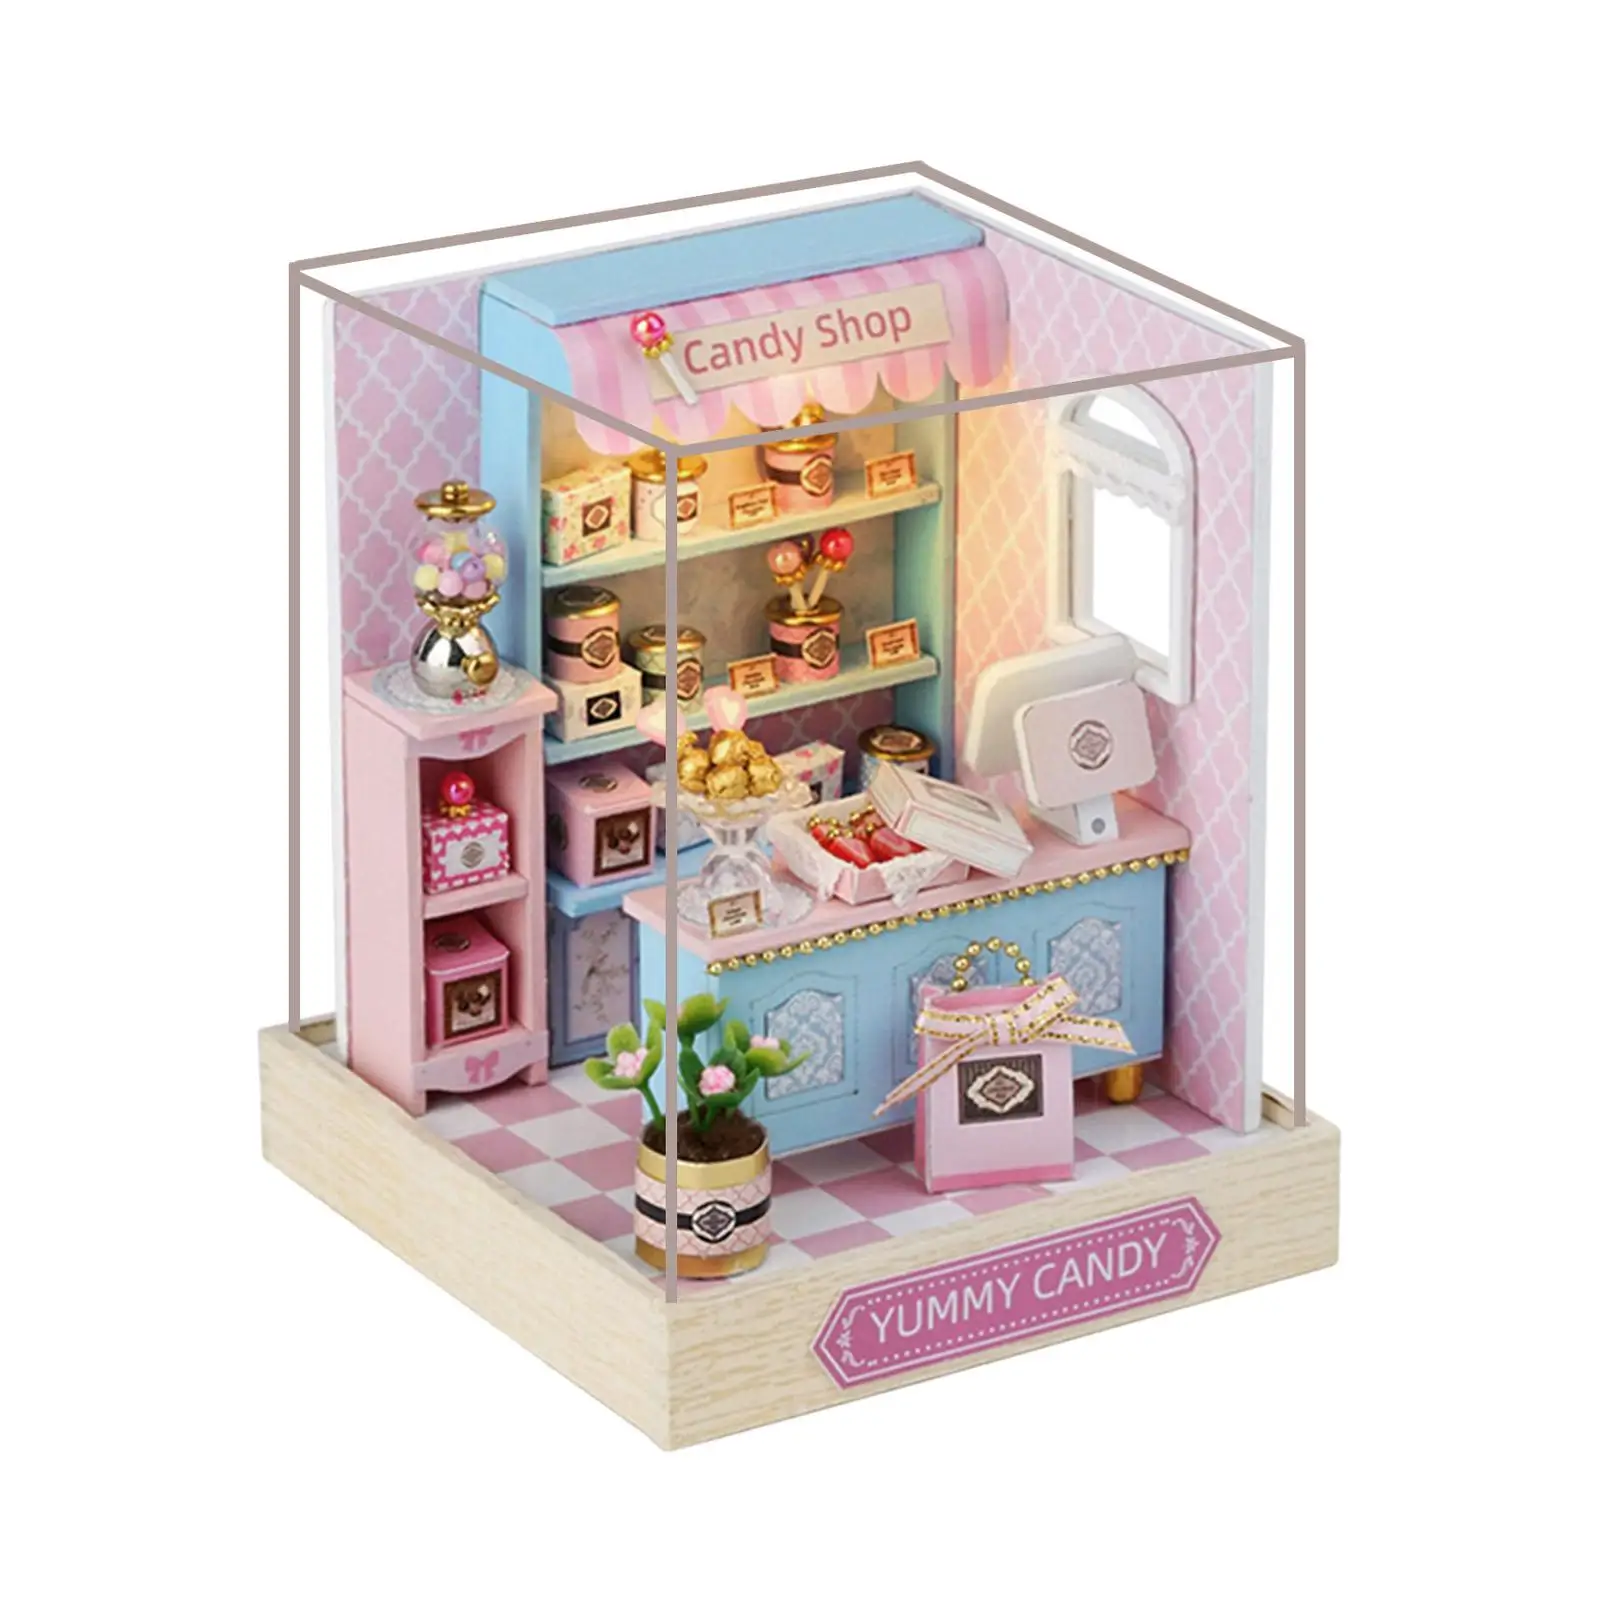 Dollhouse Miniature DIY Kits Woodcrafts Toys with Funiture 3D Puzzles Mini House Model for Adults Friends Birthday Gift Kids